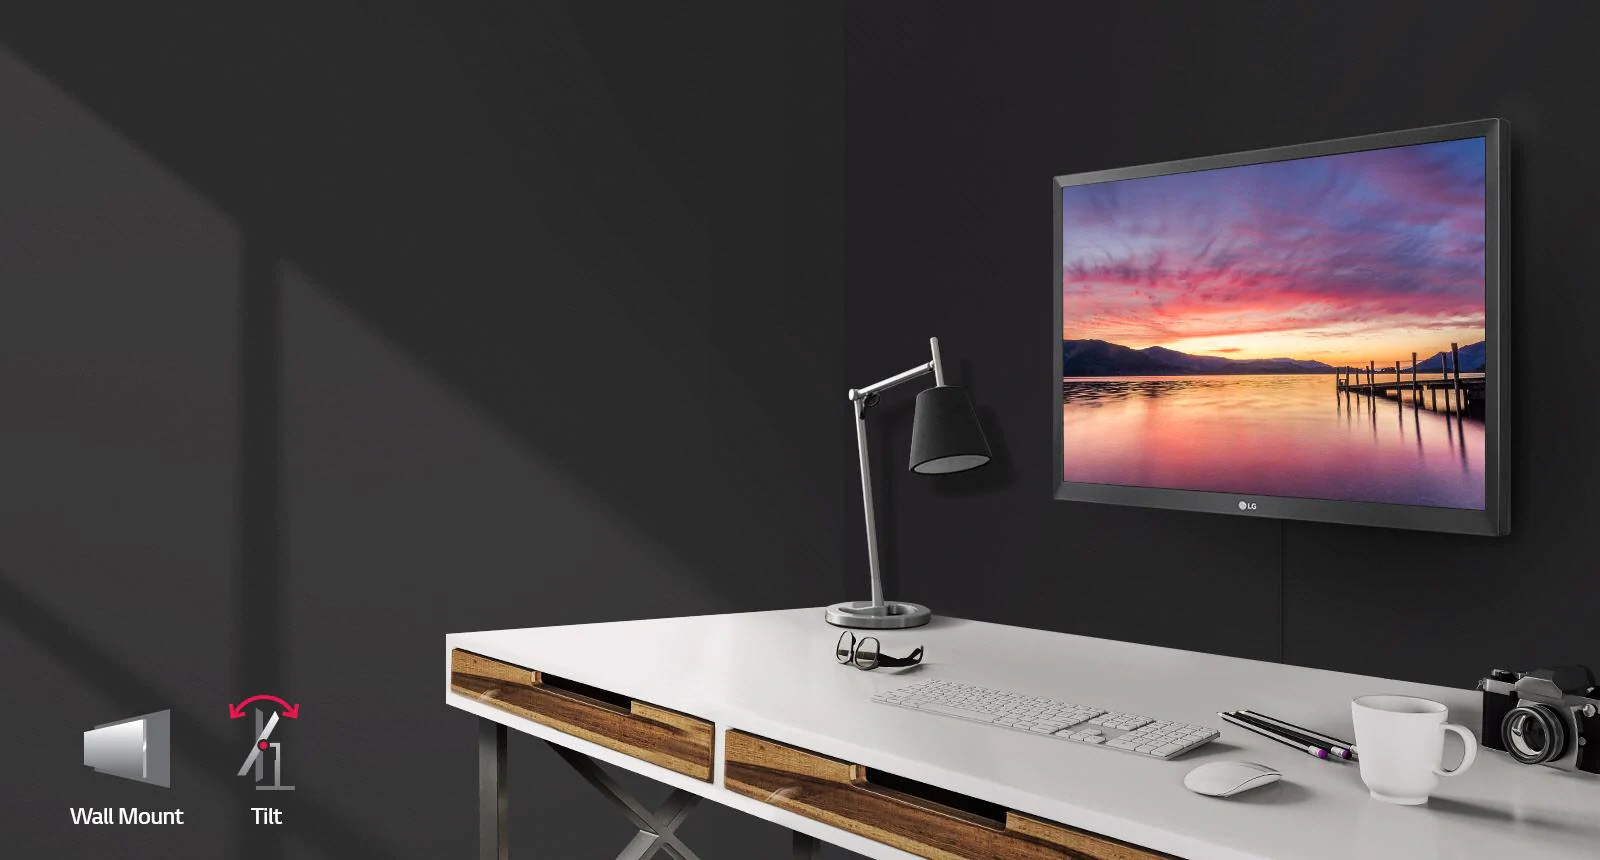 a monitor with a sunset as screen on the wall and a set of desk in front of it